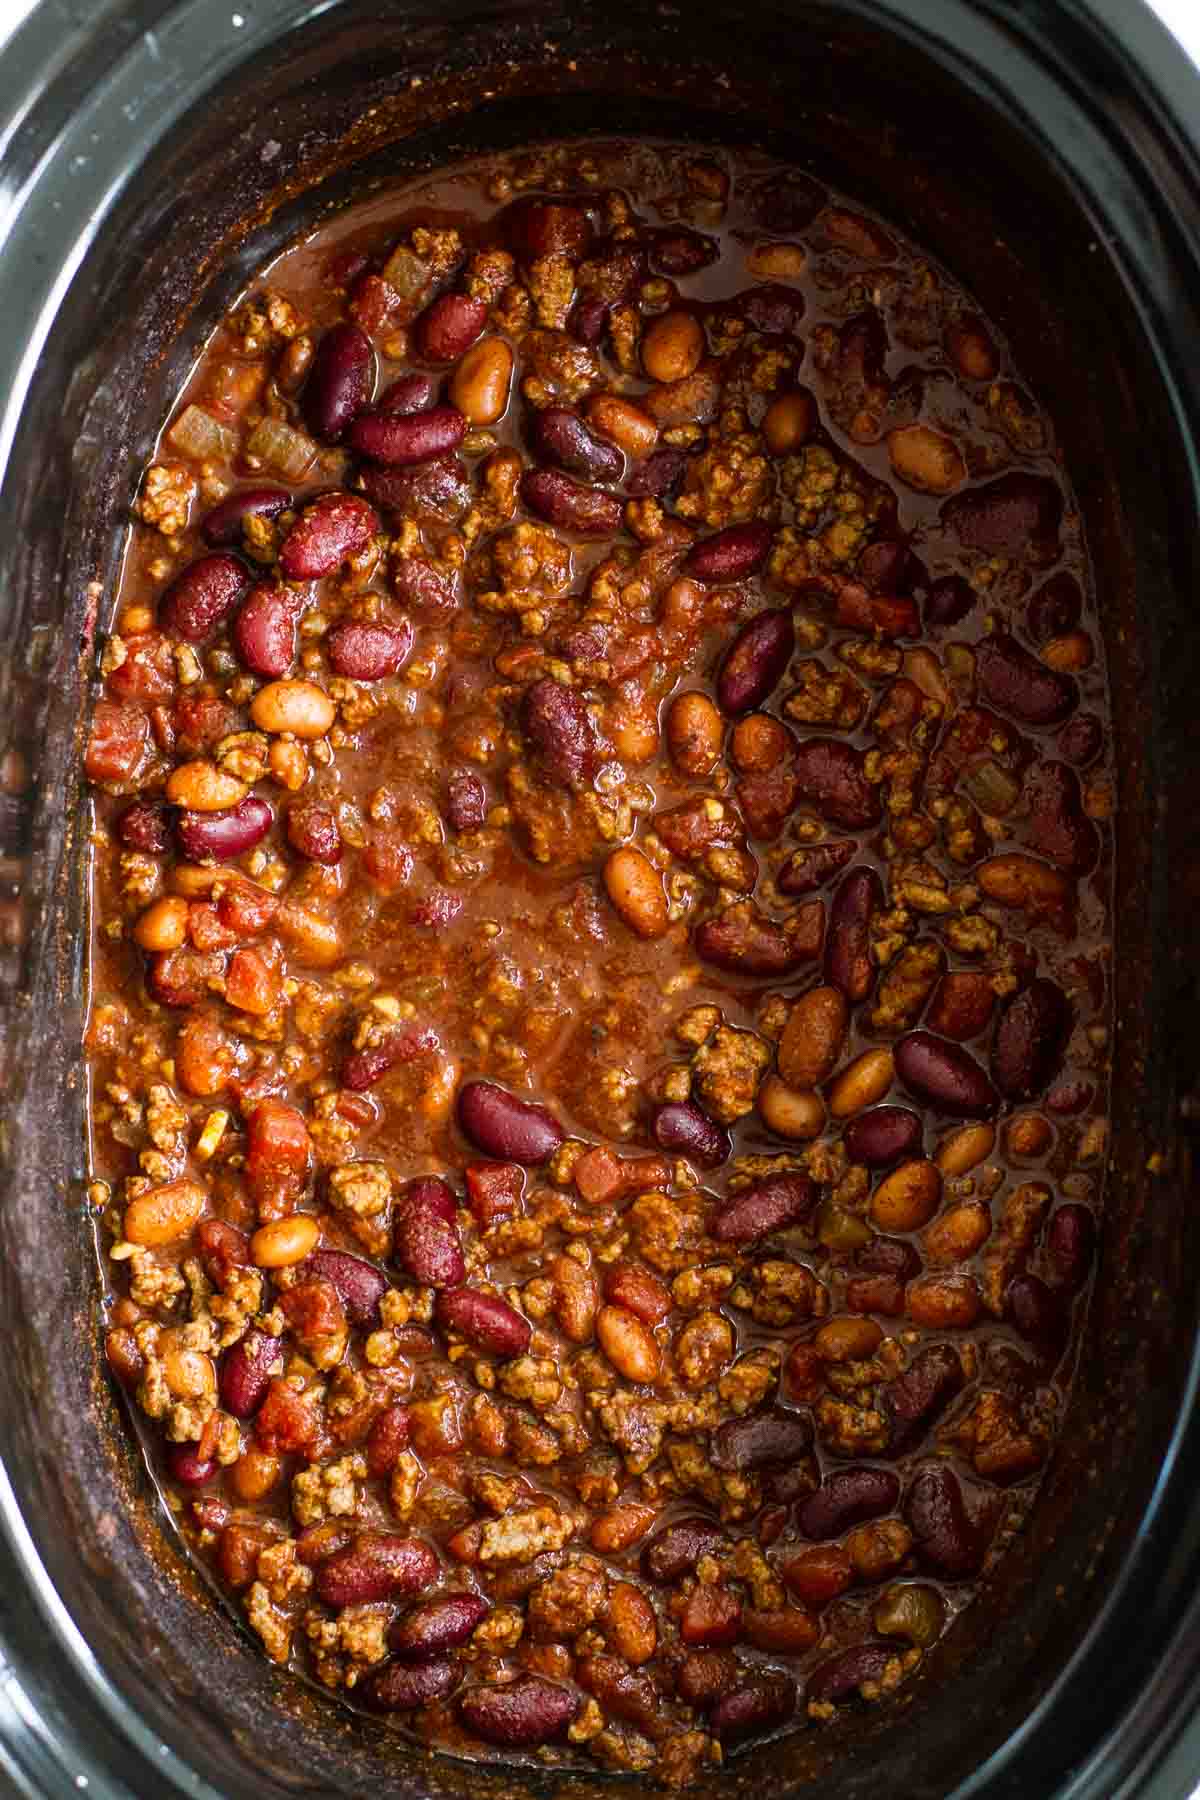 Easy Crock Pot Chili Recipe - Slow Cooker Chili - Taste and Tell